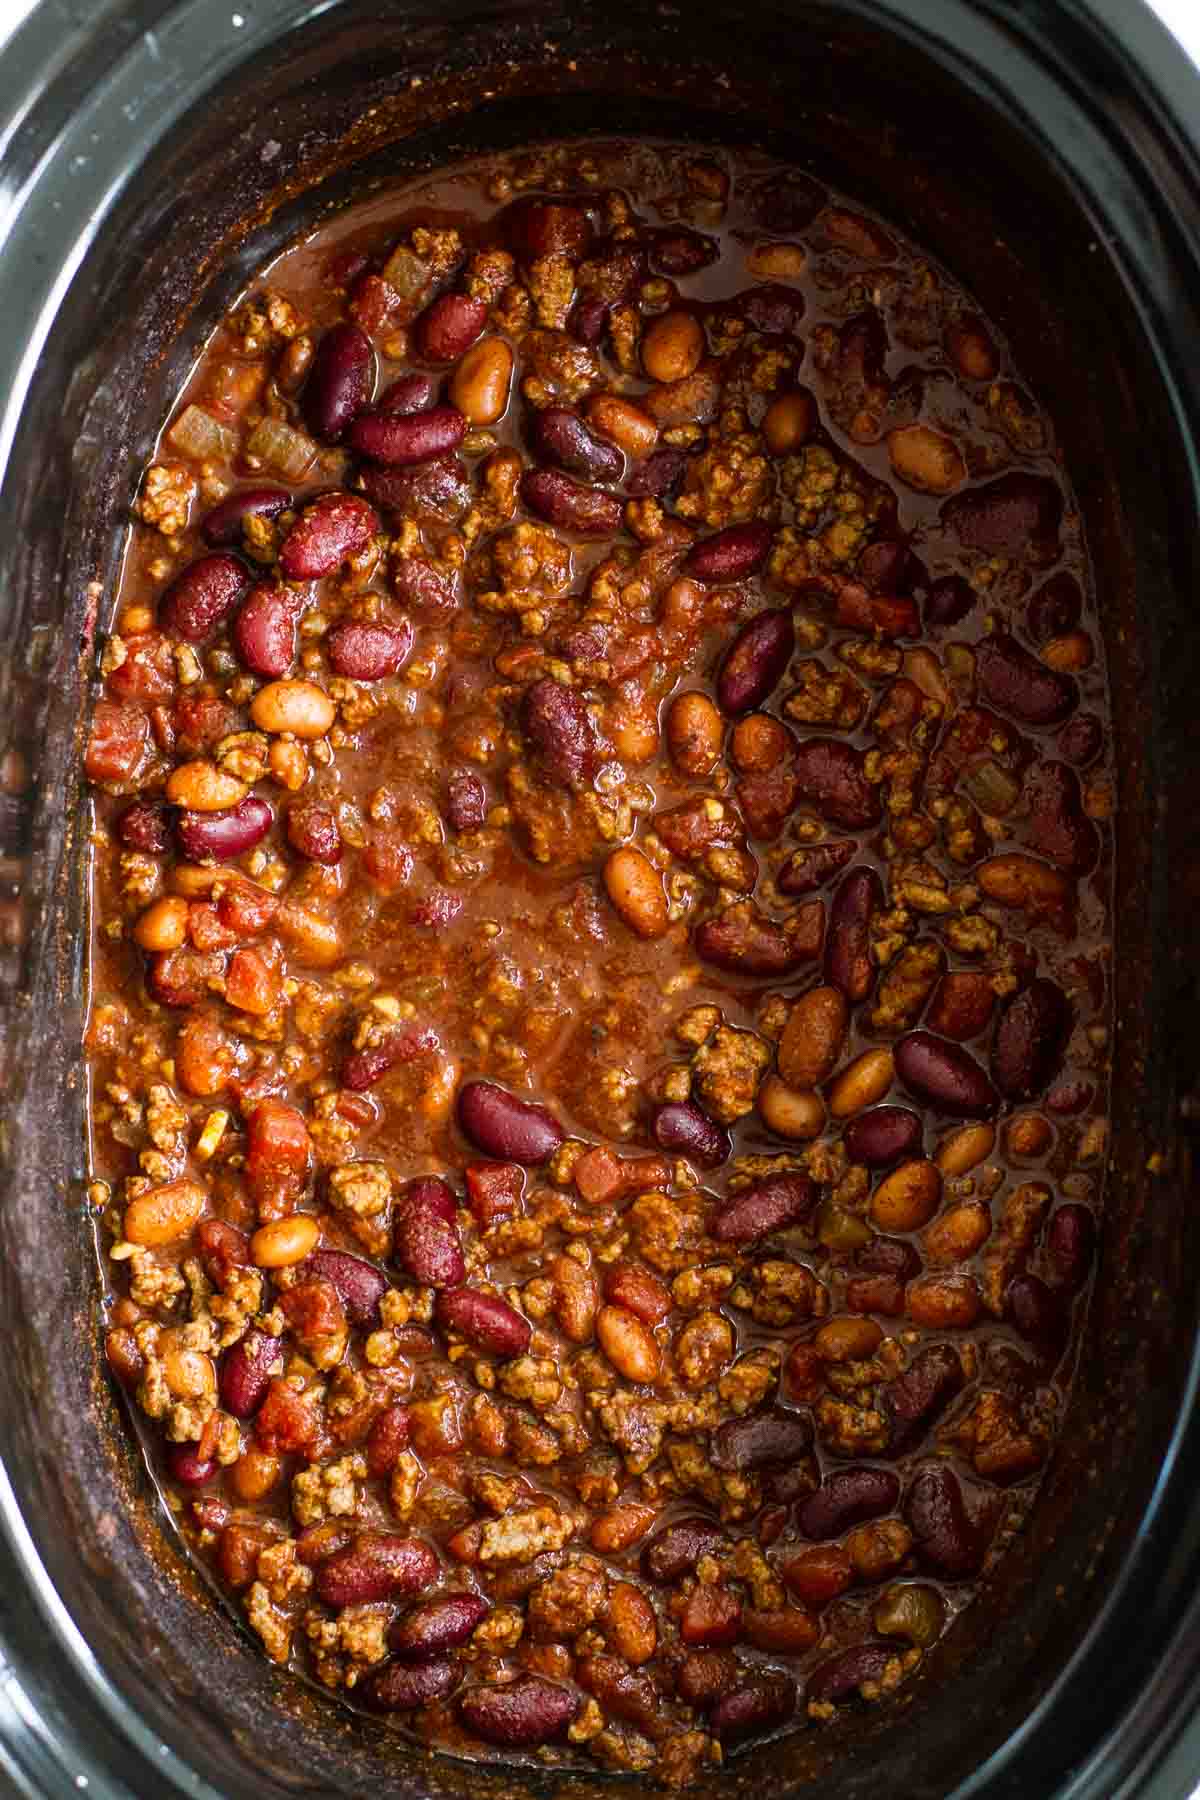 Easy Crock Pot Chili Recipe - Slow Cooker Chili - Taste and Tell